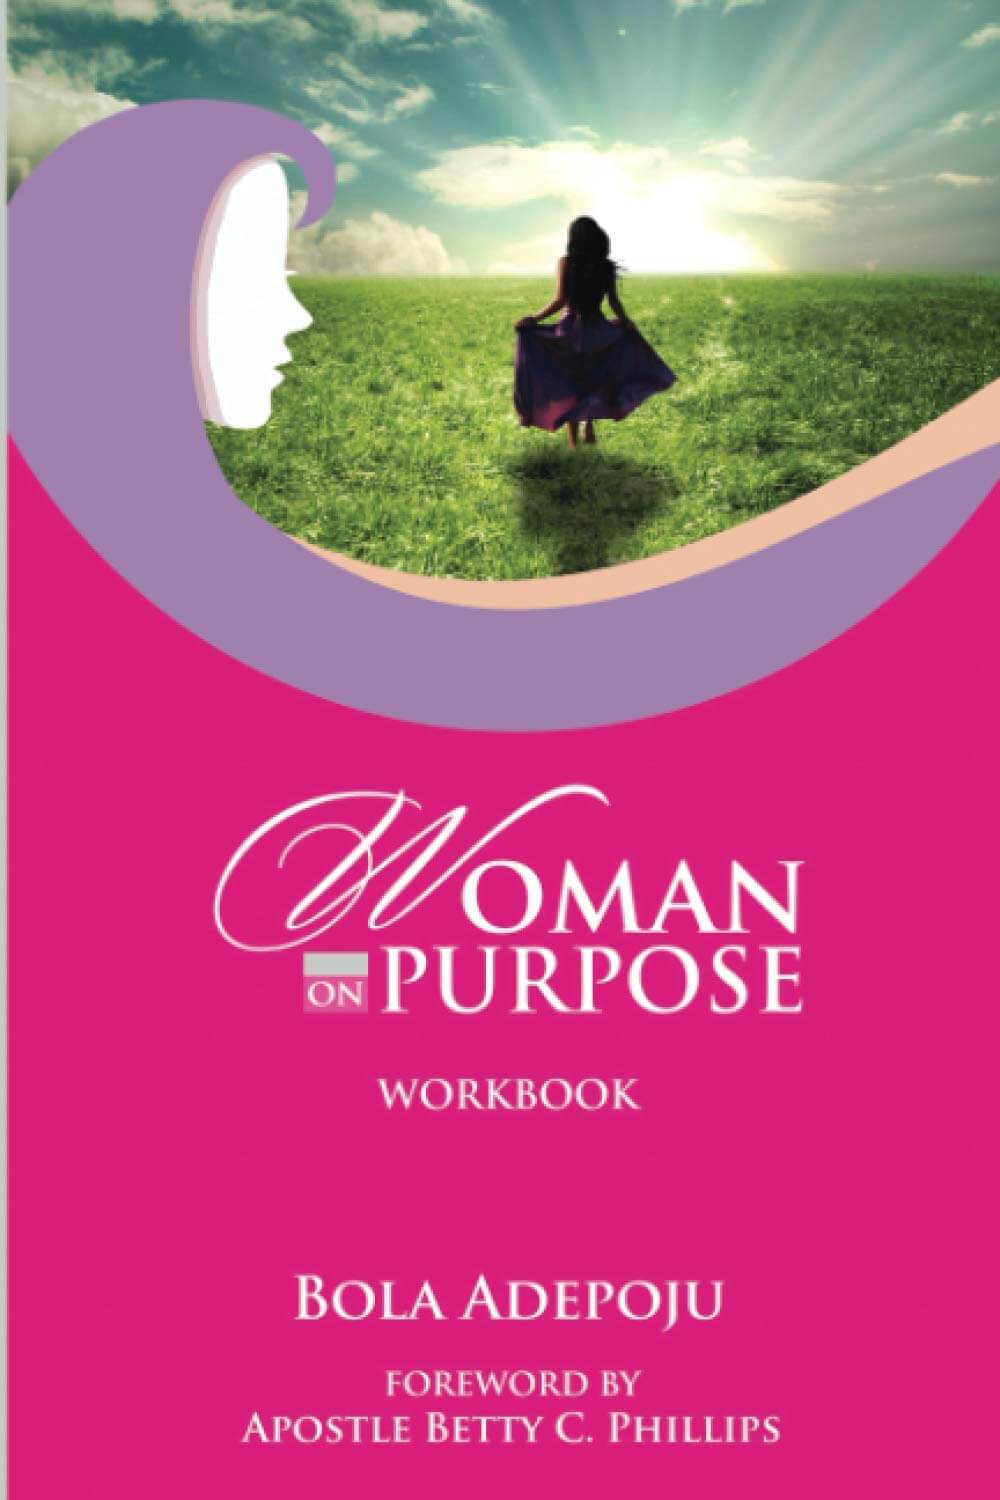 A picture of the book, "Woman on Purpose".